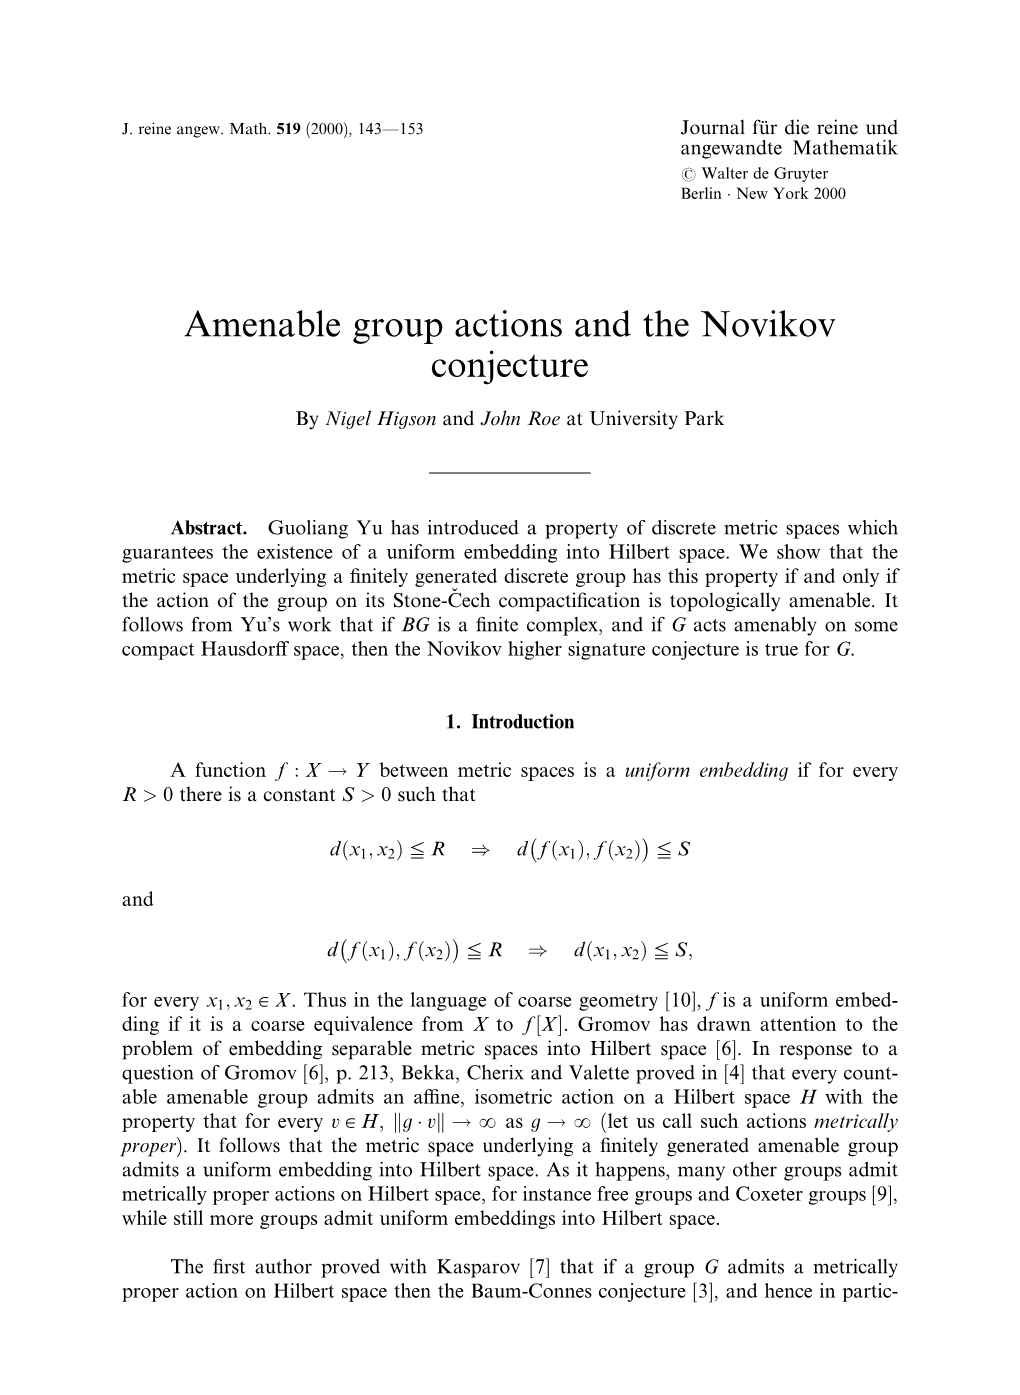 Amenable Group Actions and the Novikov Conjecture